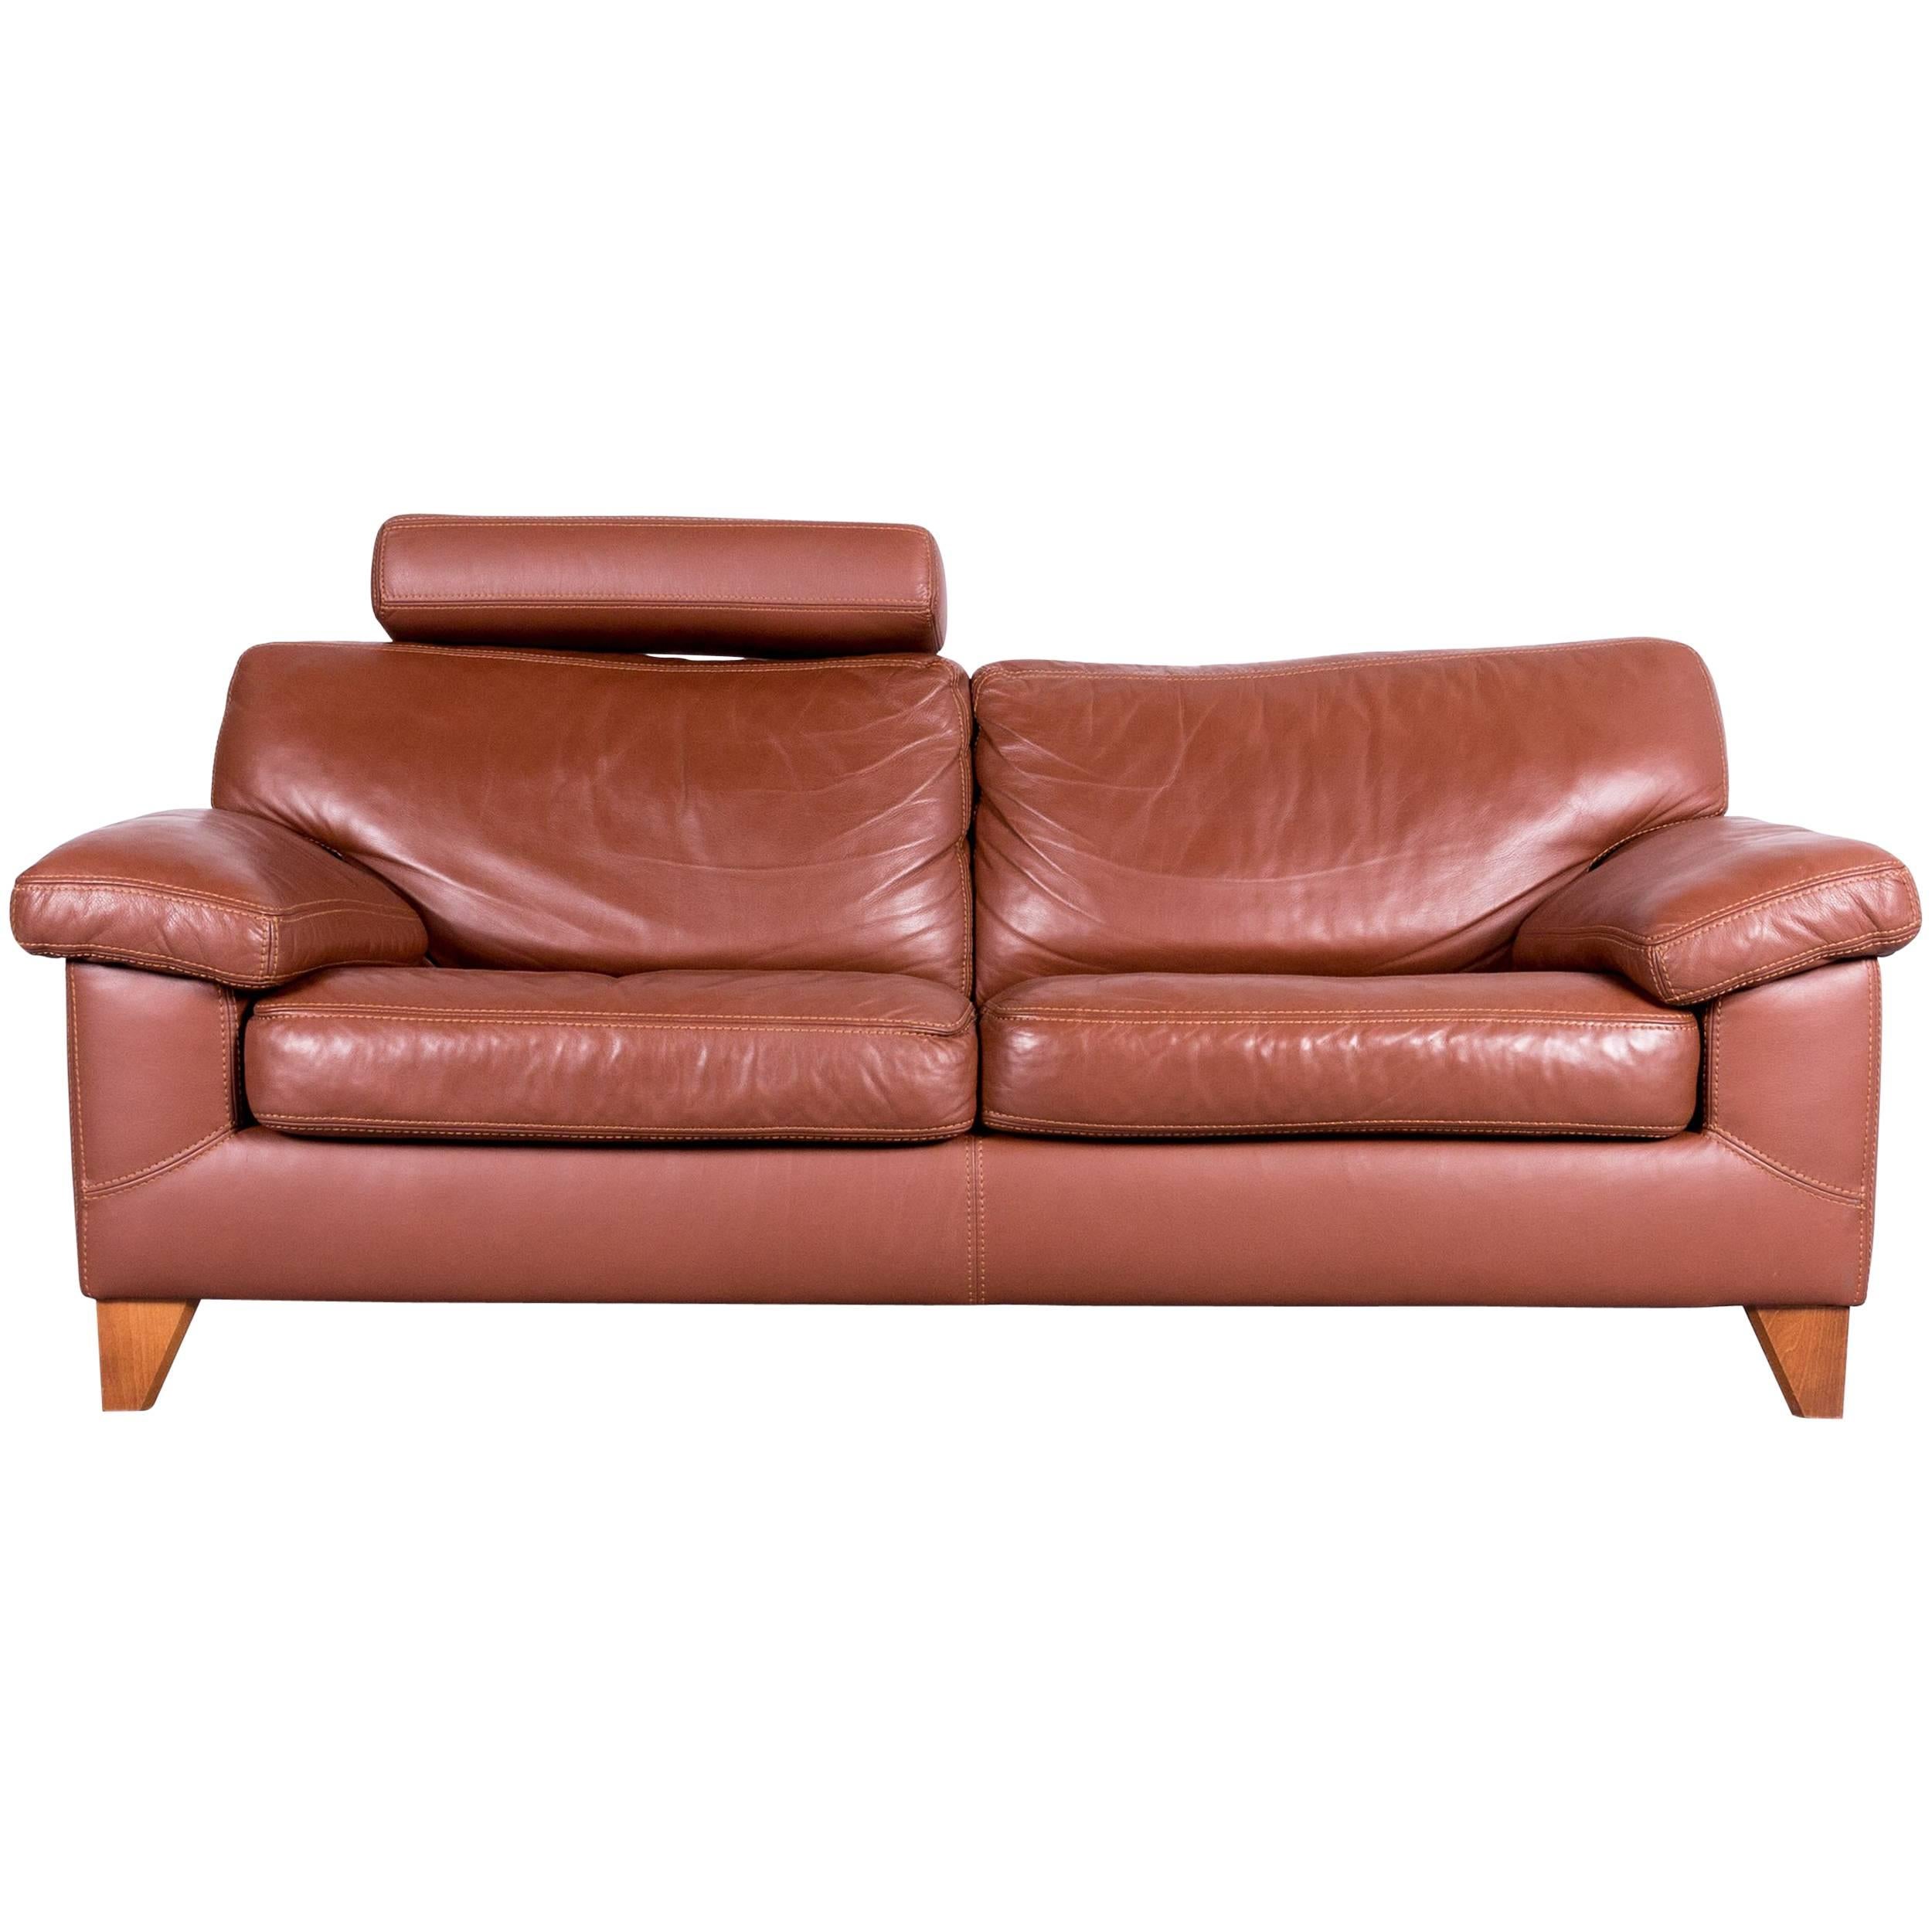 Machalke Designer Brown Leather Sofa Two-Seat Couch Neck Rest For Sale